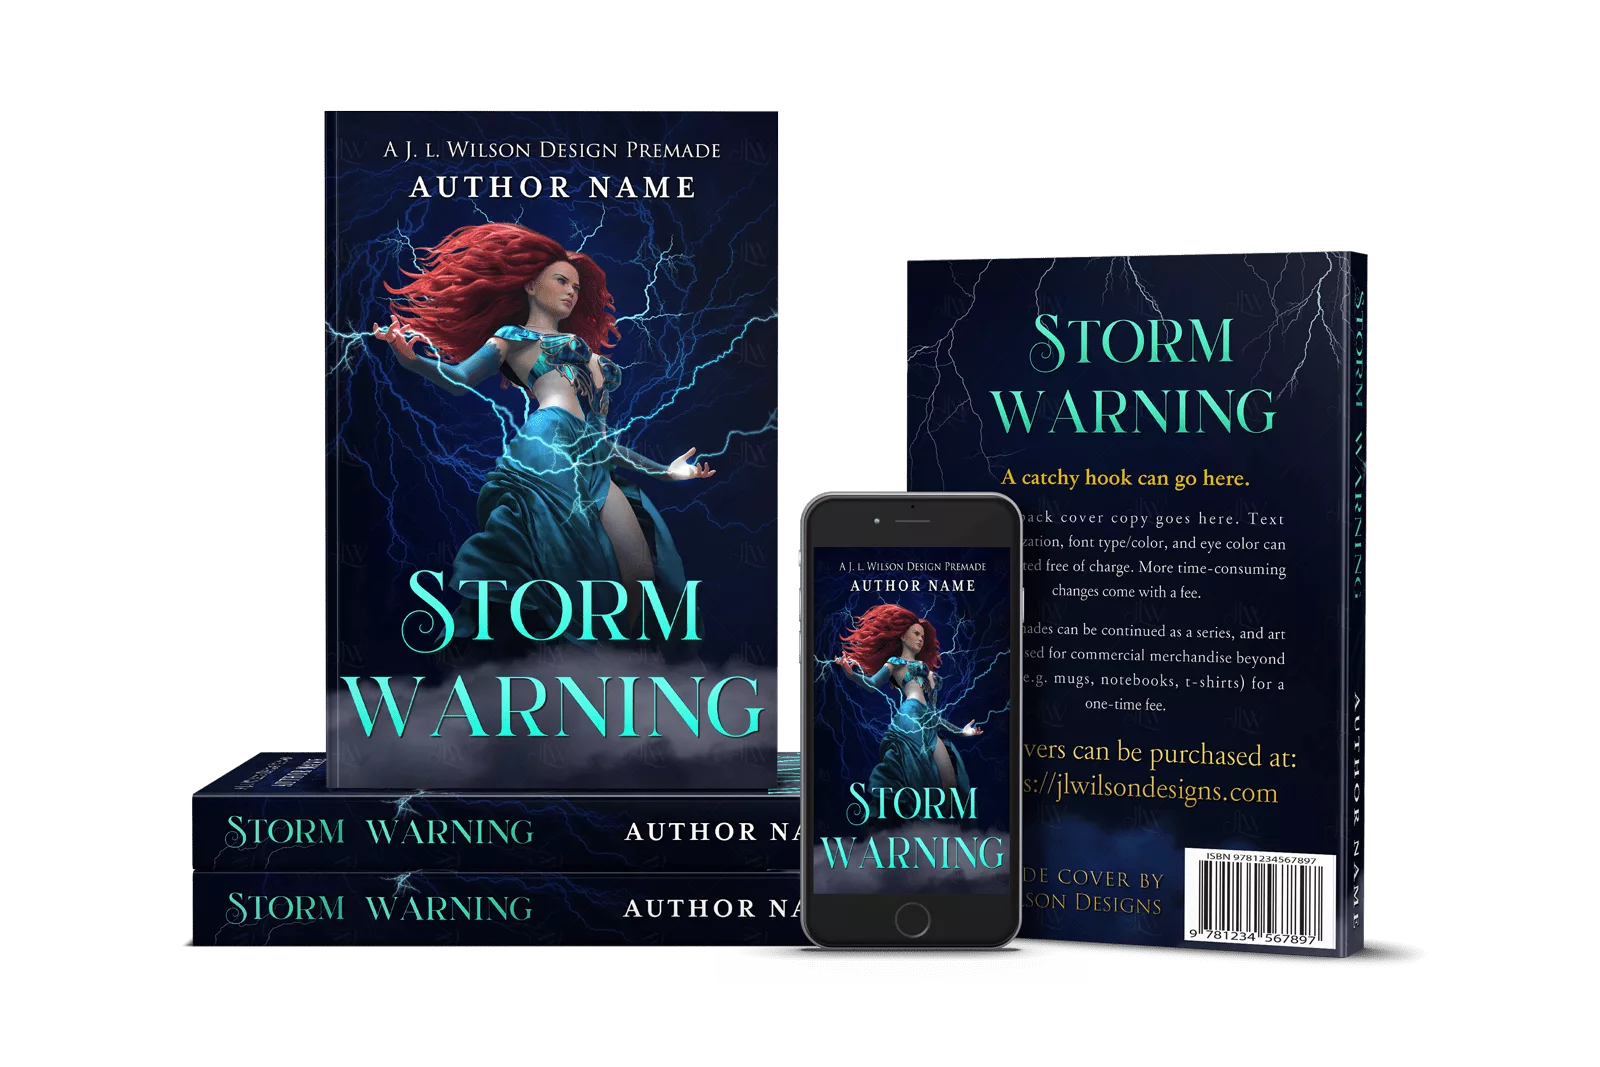 A fantasy book cover featuring a beautiful woman with long red hair in a flowing blue dress wielding lightning storm magic